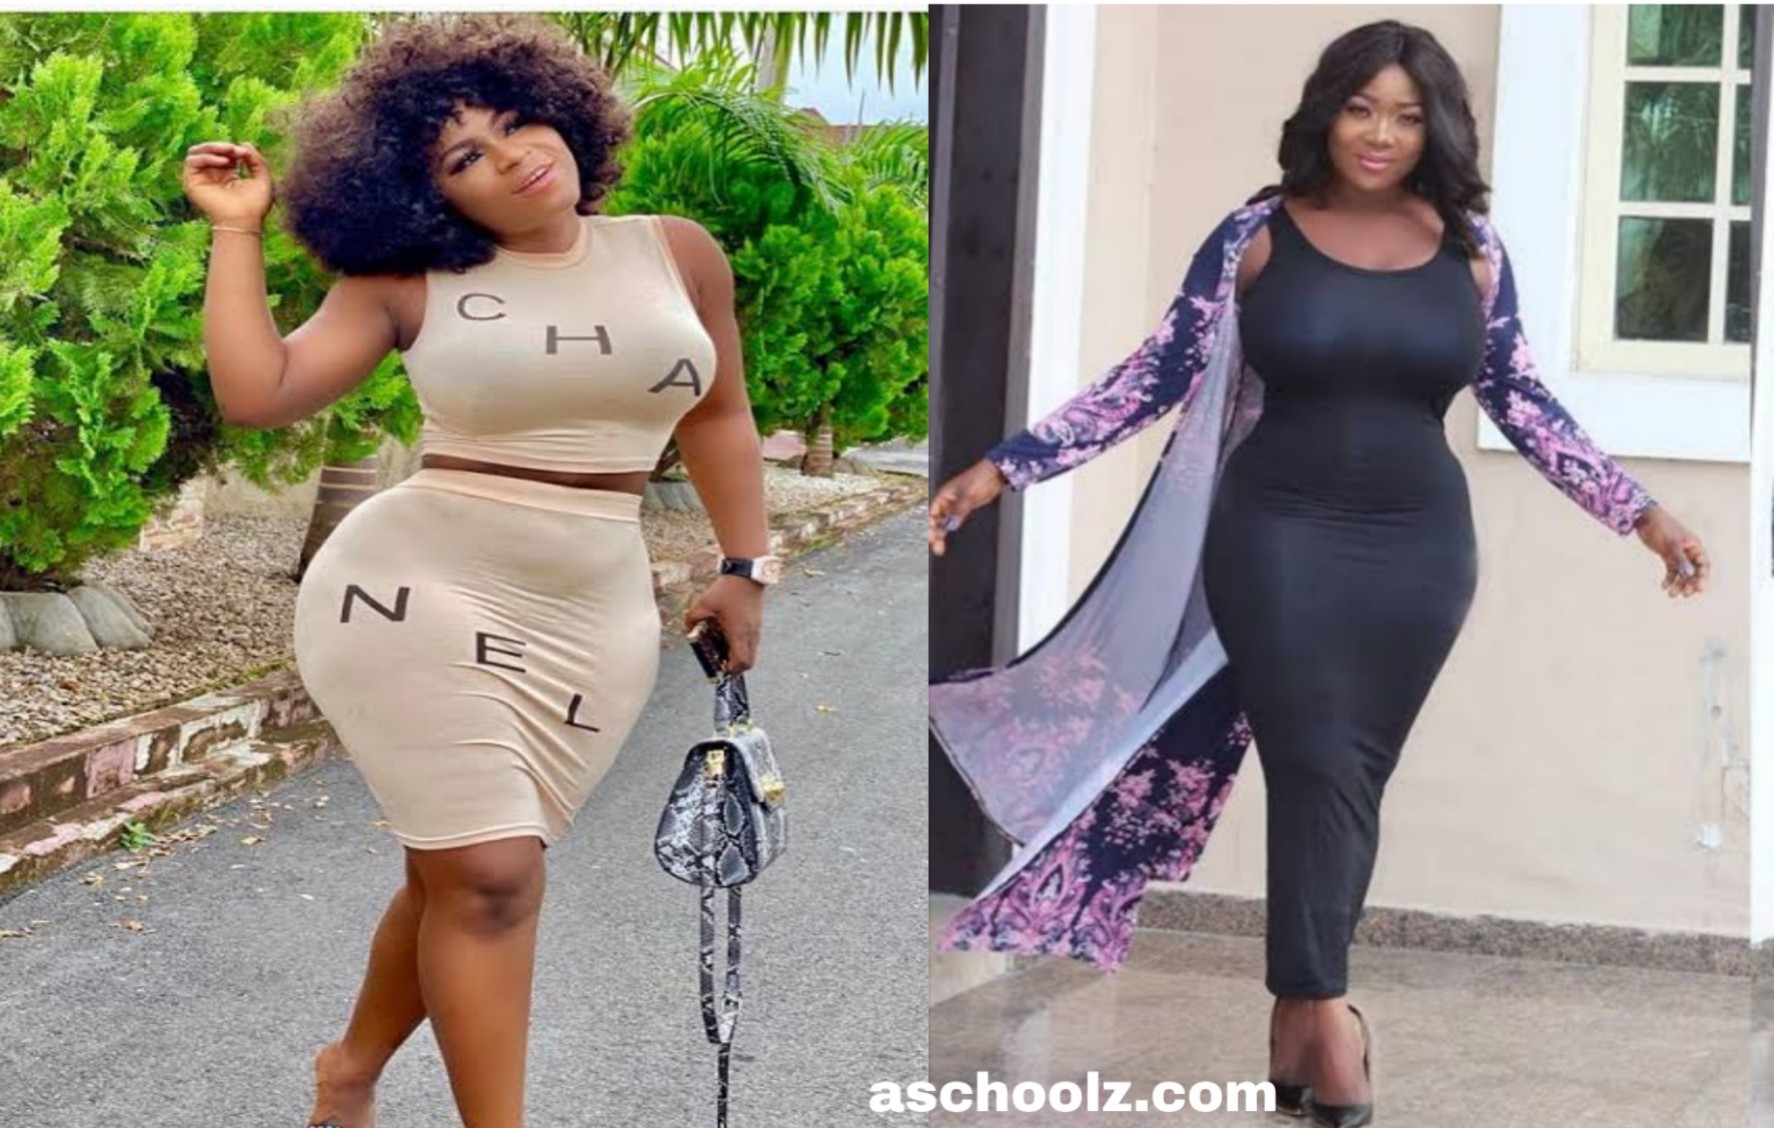 One of The Reasons Behind Mercy Johnson And Destiny Etiko's Nice Shapes (Photos)